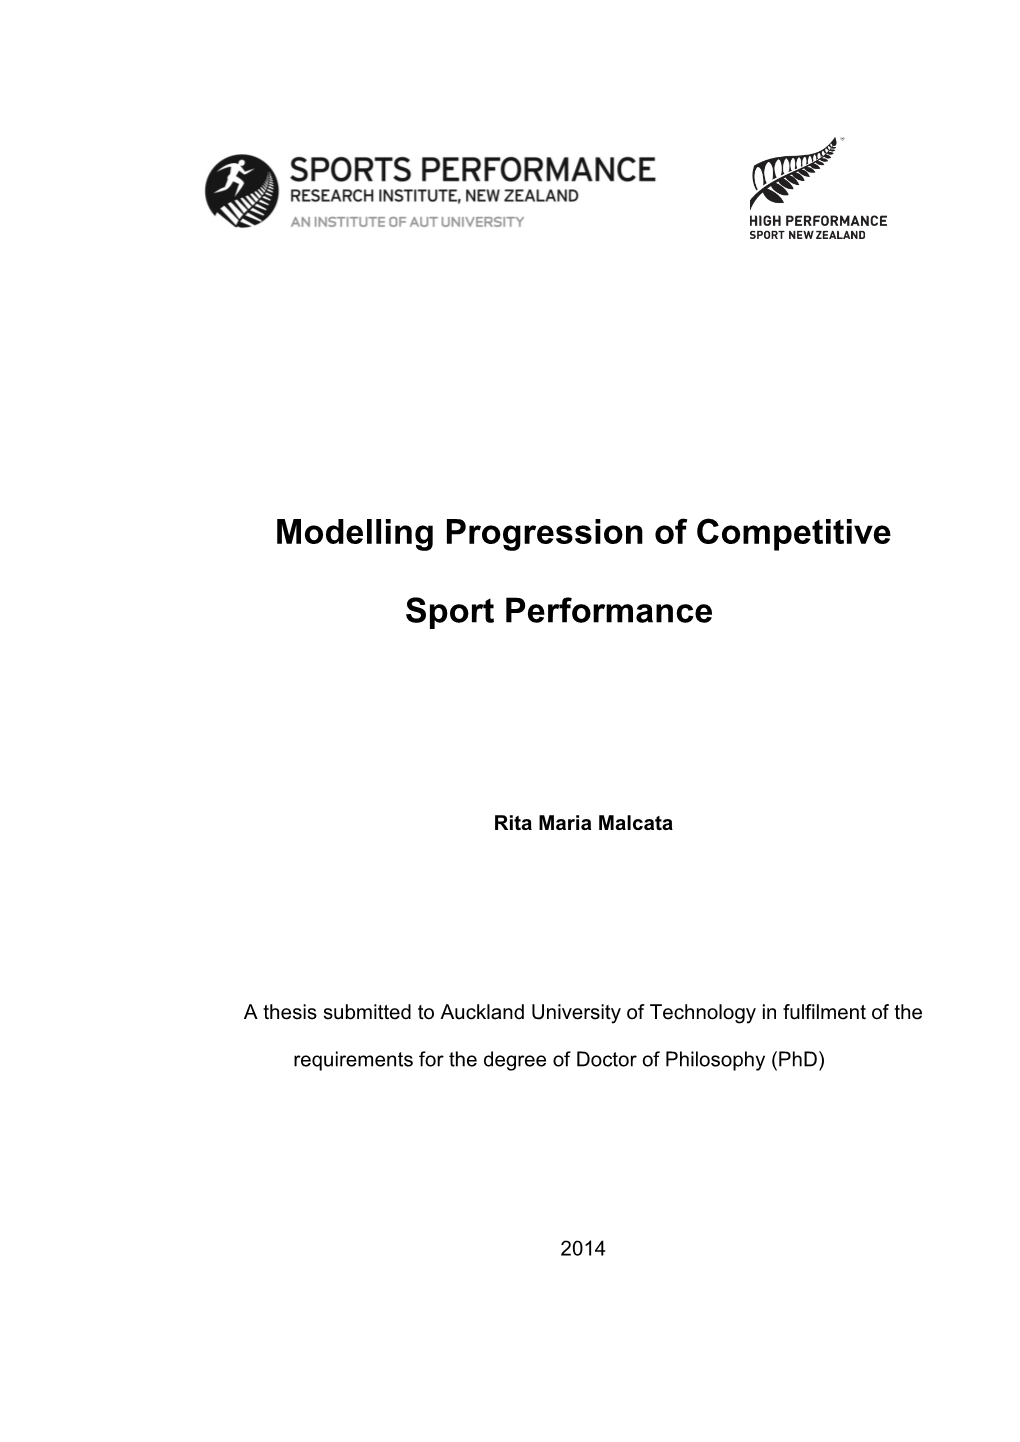 Modelling Progression of Competitive Sport Performance